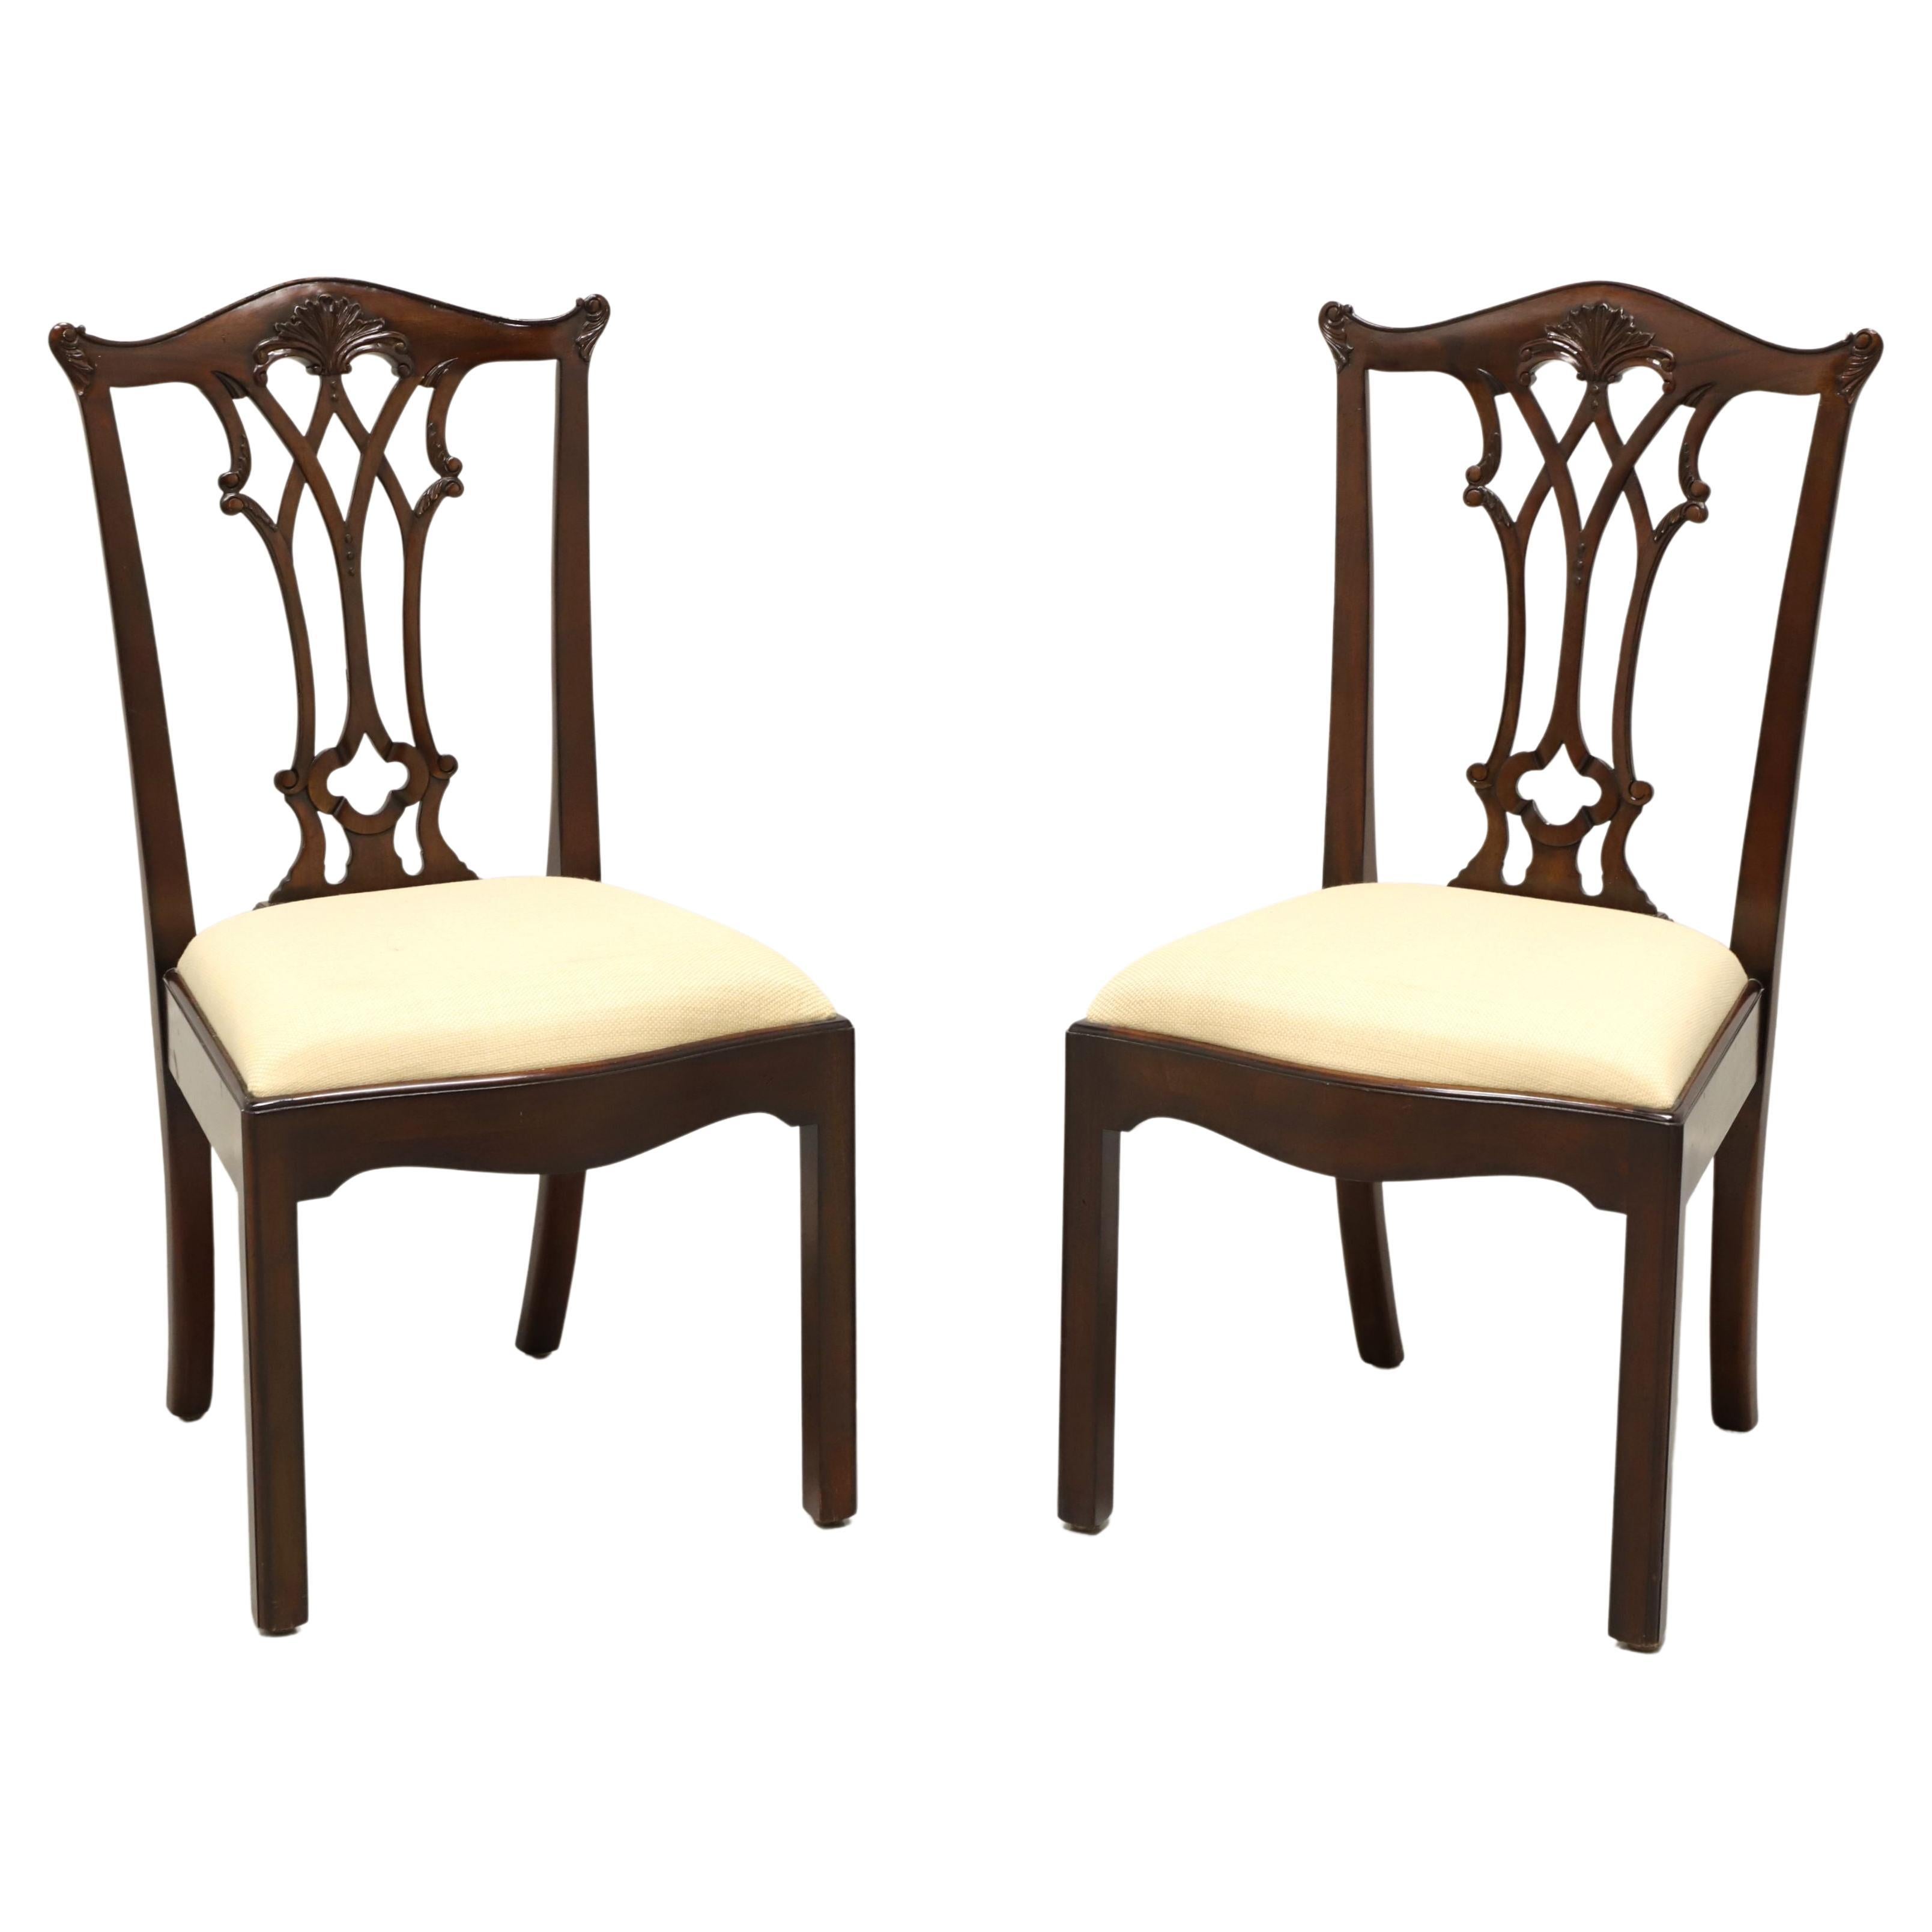 MAITLAND SMITH Connecticut Regency Mahogany Dining Side Chairs - Pair C